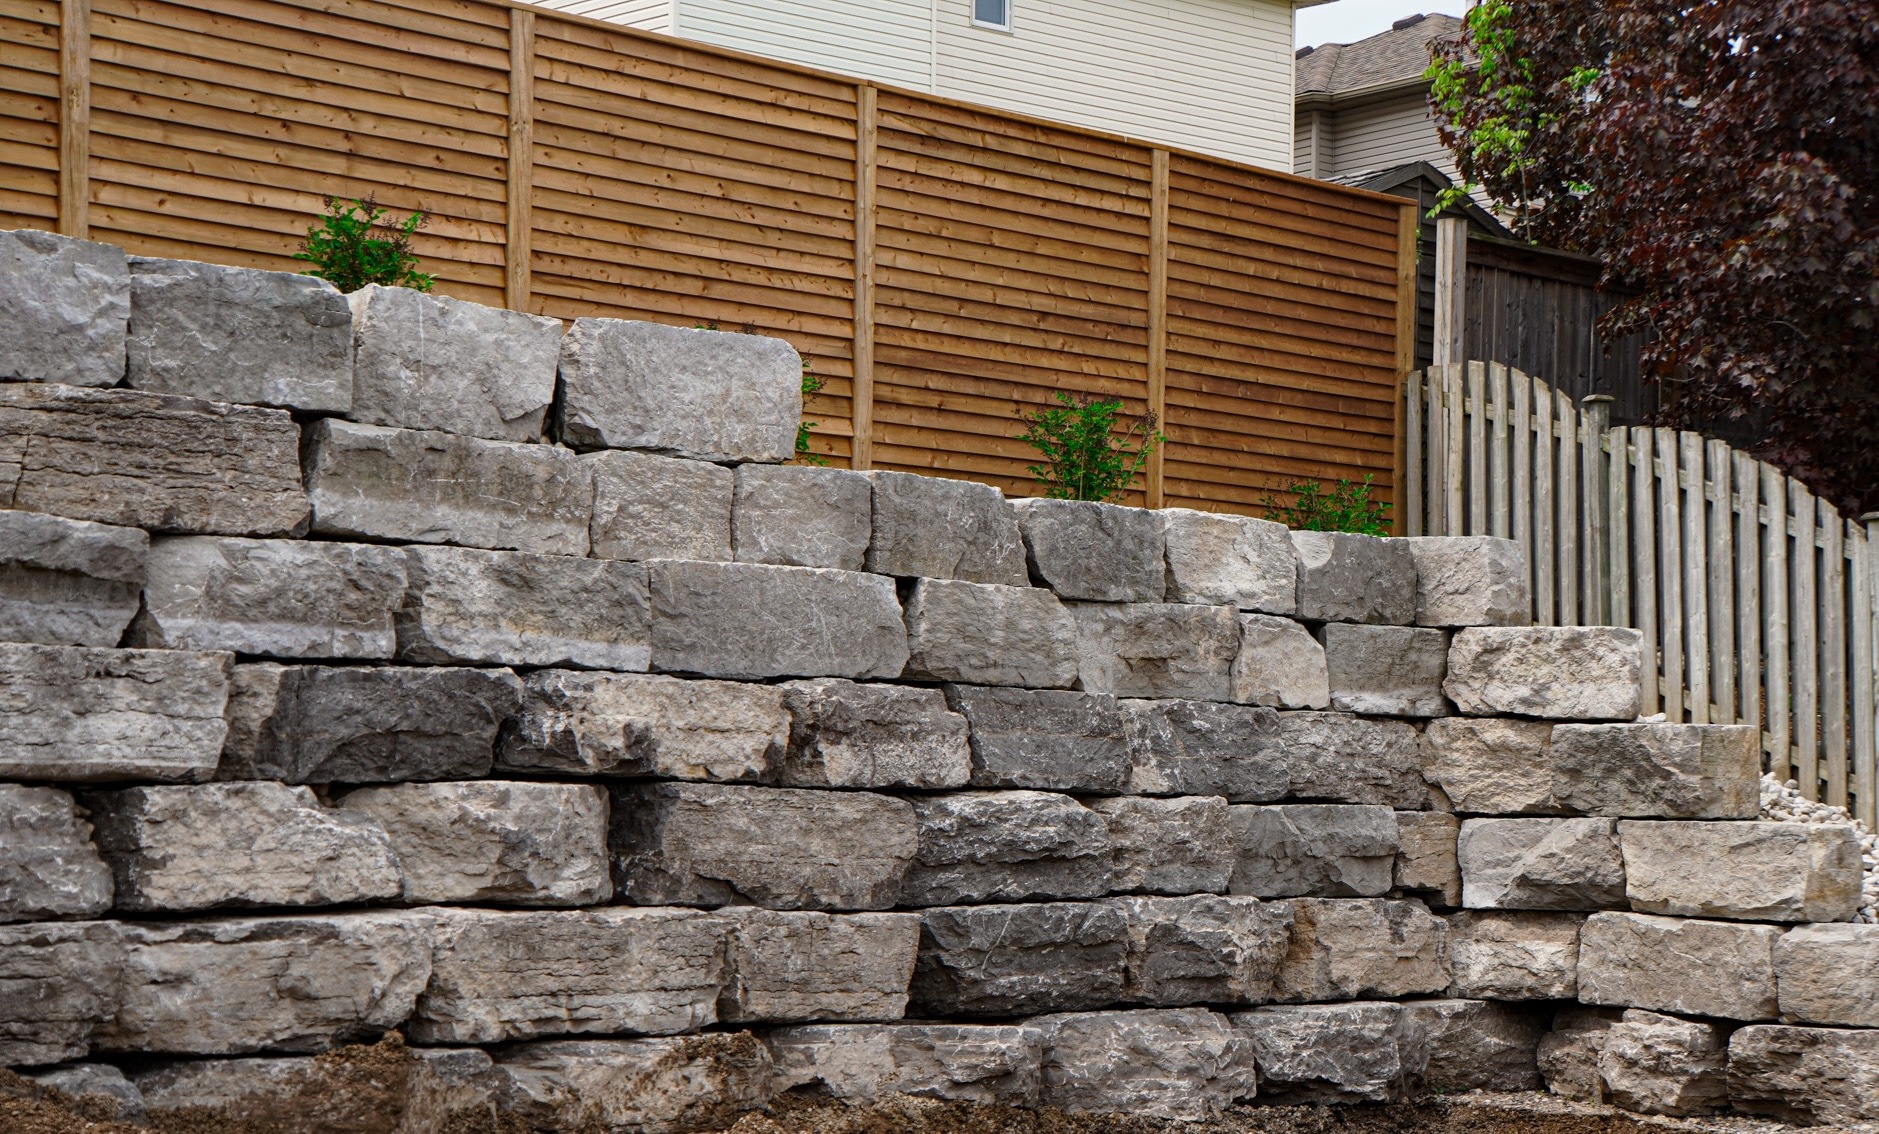 A stacked stone retaining wall in a residential area with a wooden fence and some green shrubs visible behind the wall.